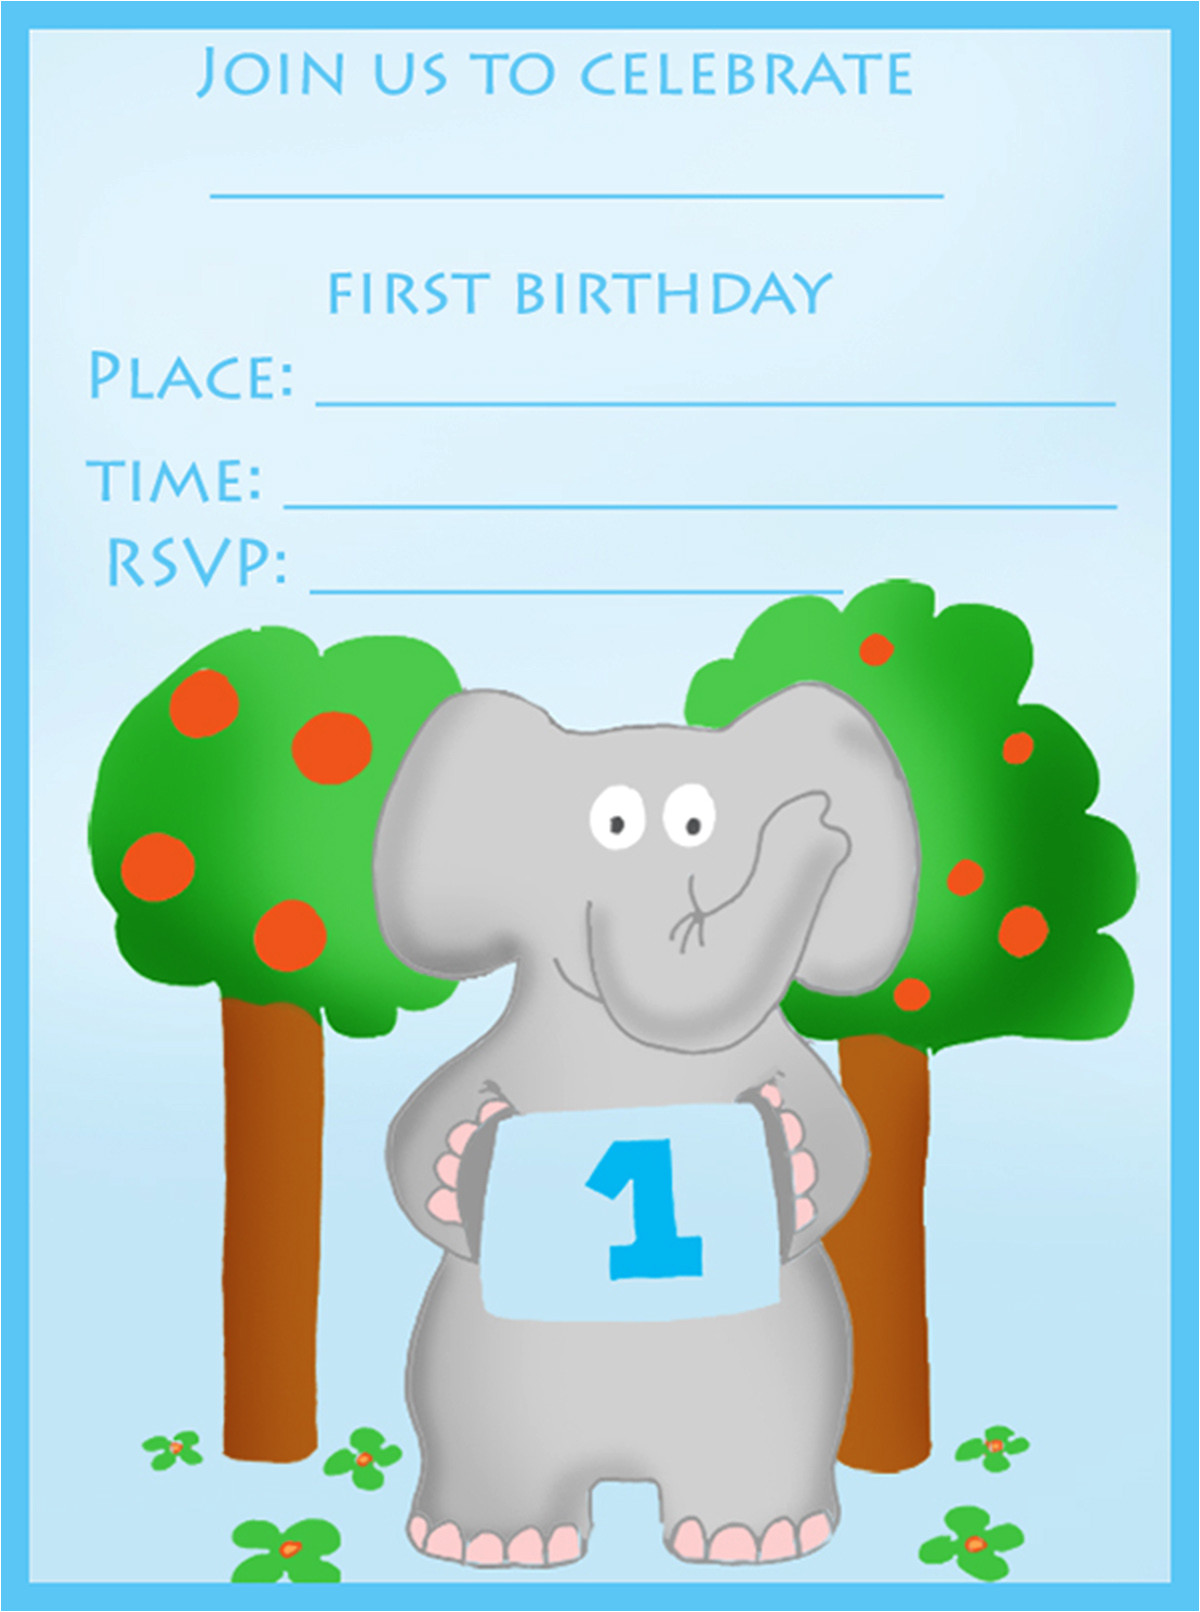 find your printable 1st birthday invitation here